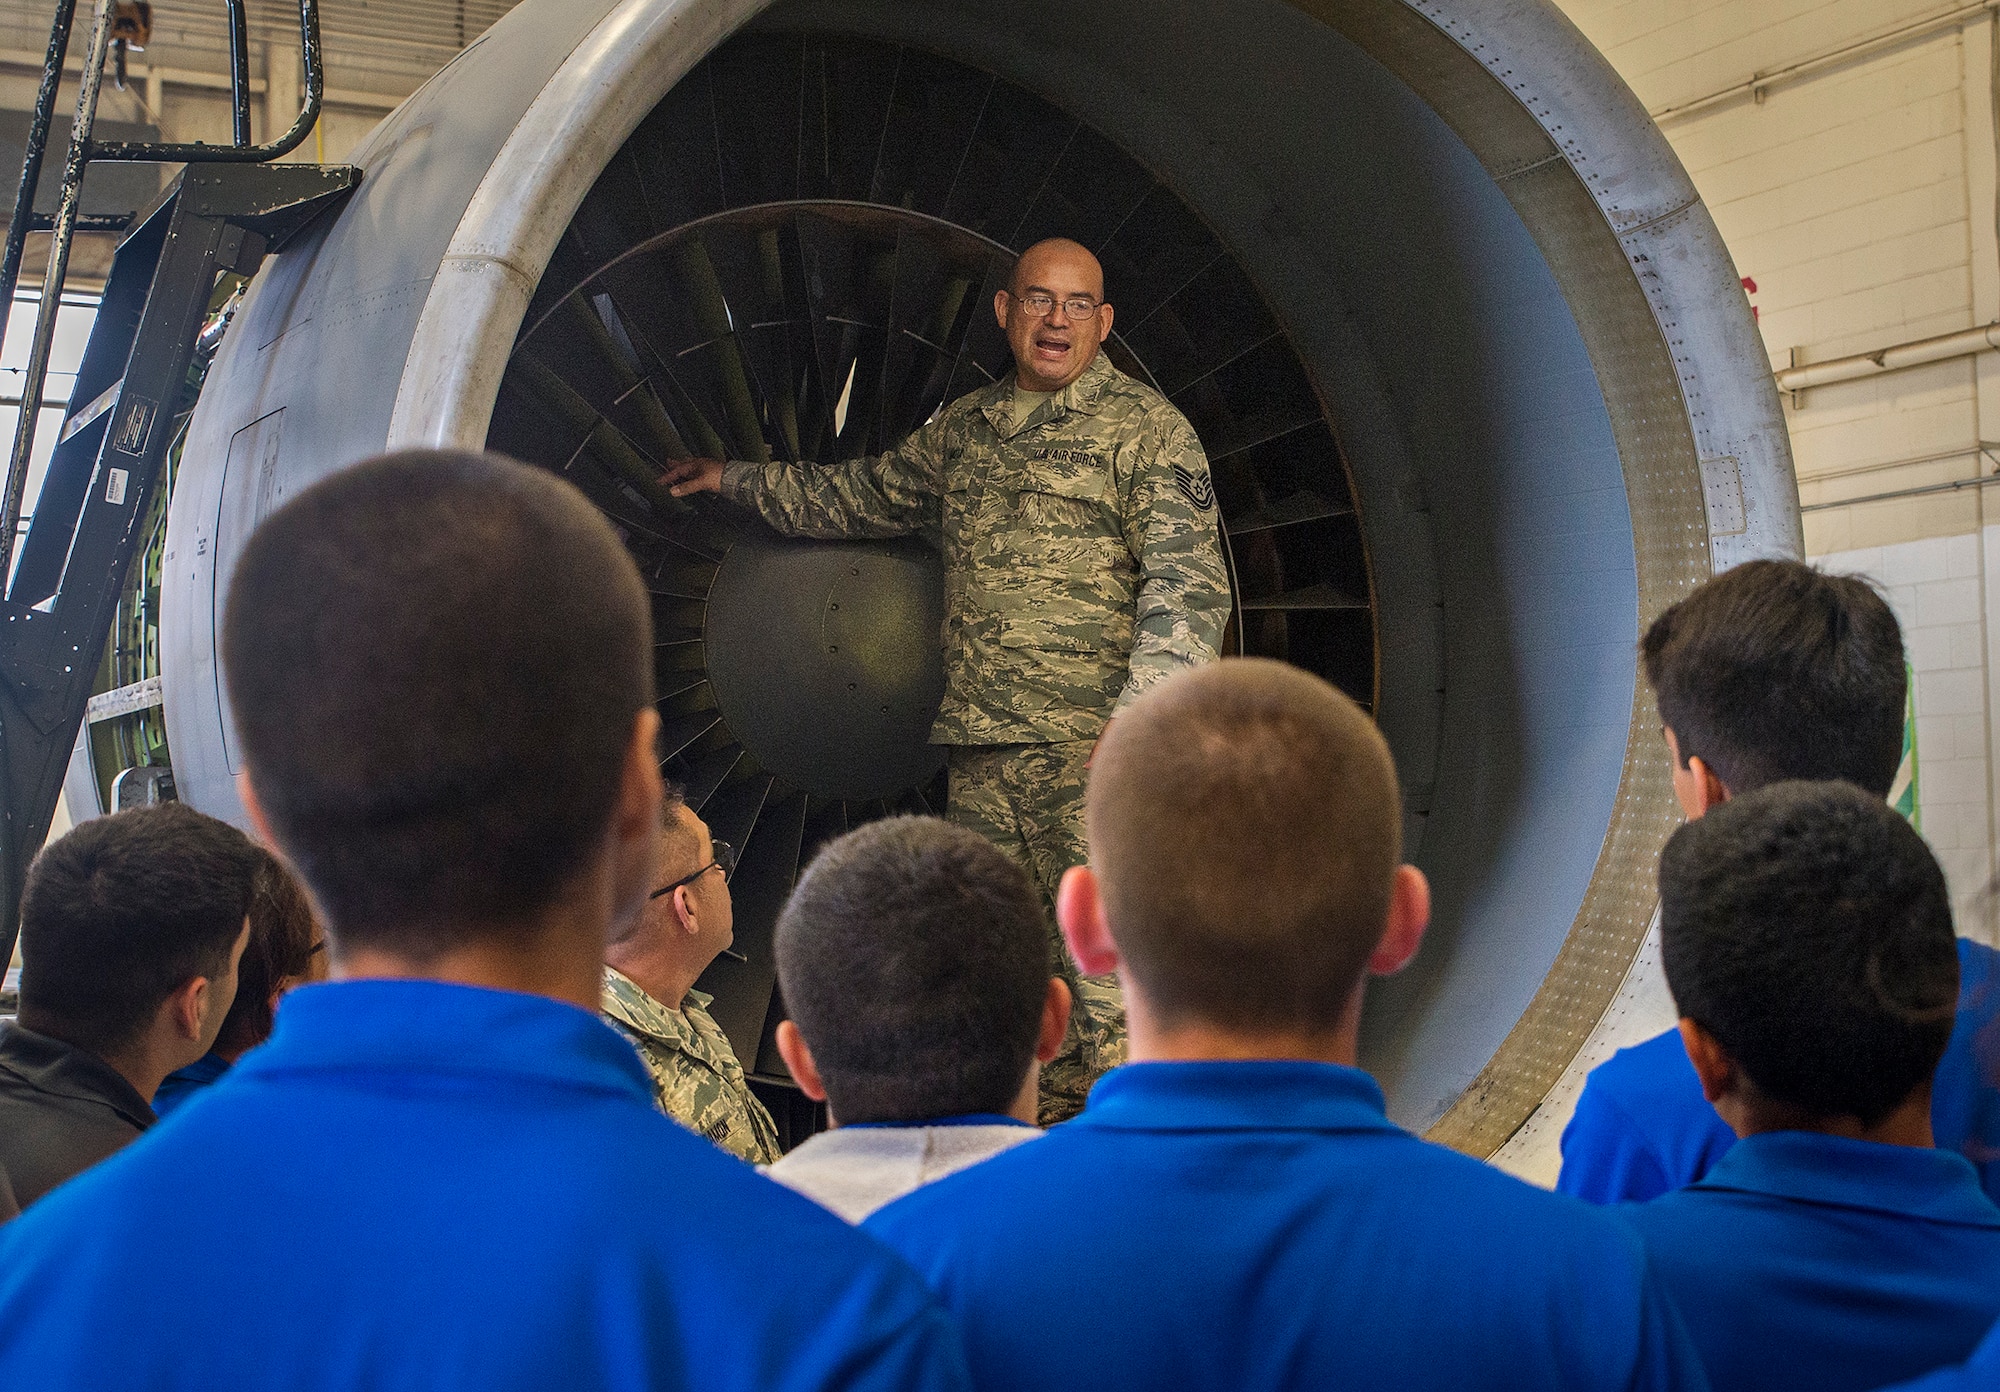 Tech. Sgt. Alberto Mota, a 433rd Maintenance Squadron jet engine mechanic, explains the major differences between the C-5A and C-5M model engines to Junior ROTC students from John Jay High School May 12, 2016 at Joint Base San Antonio-Lackland, Texas. The students toured the survival, engine, and structural engineering shops at the 433rd Airlift Wing and also saw a Military Working Dog demonstration at the 341st Training Squadron. (U.S. Air Force photo by Benjamin Faske) (released)